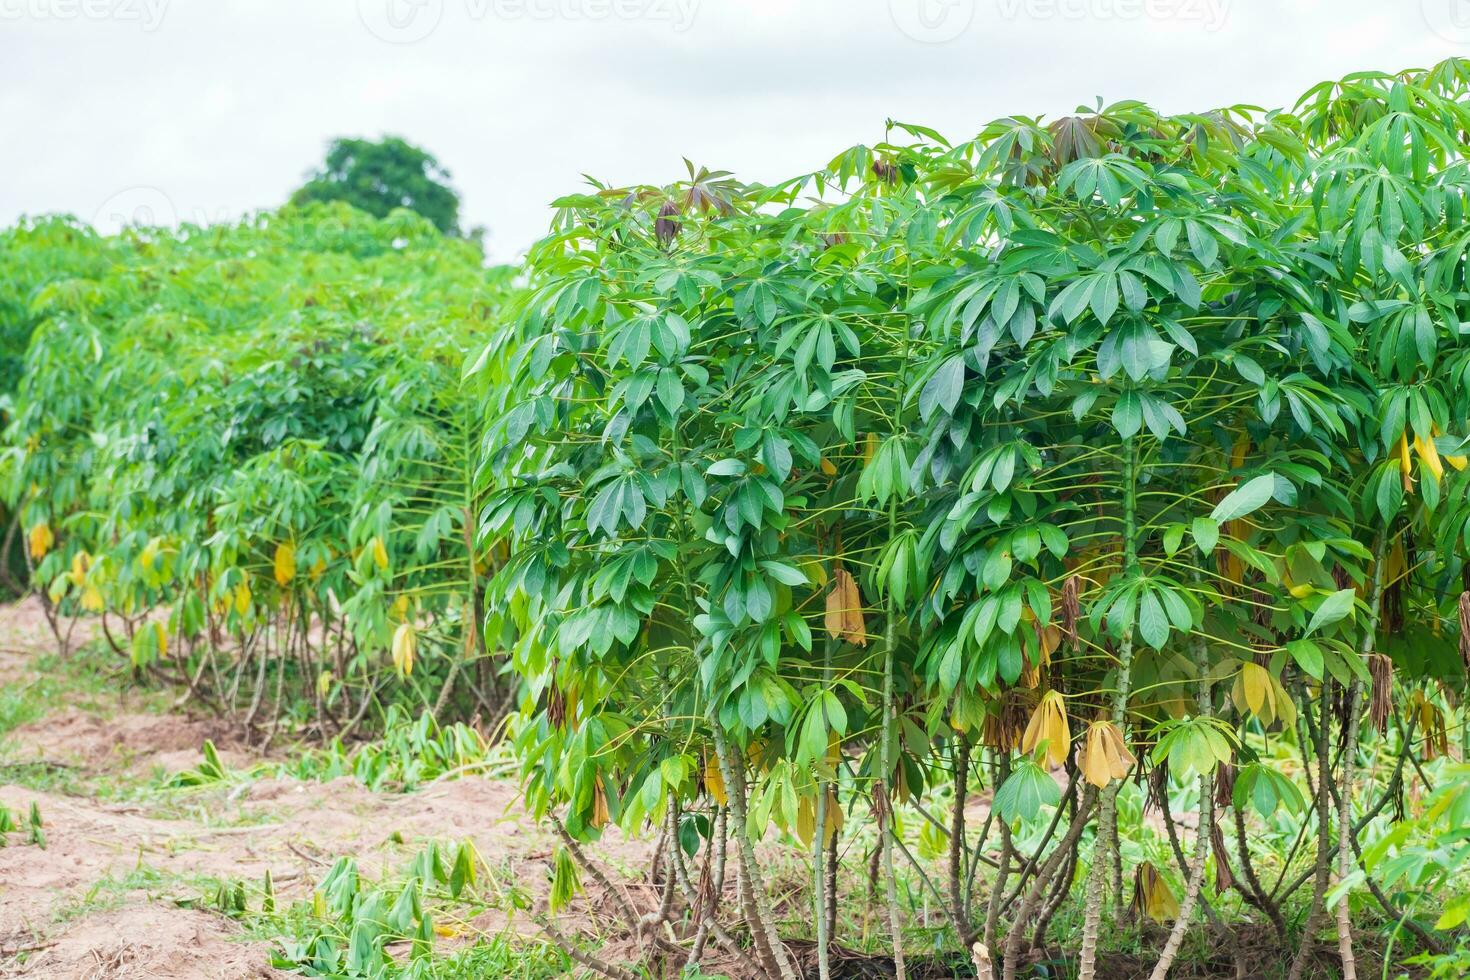 cassava, in cassava fields in the rainy season, has greenery and freshness. Shows the fertility of the soil, green cassava leaf photo